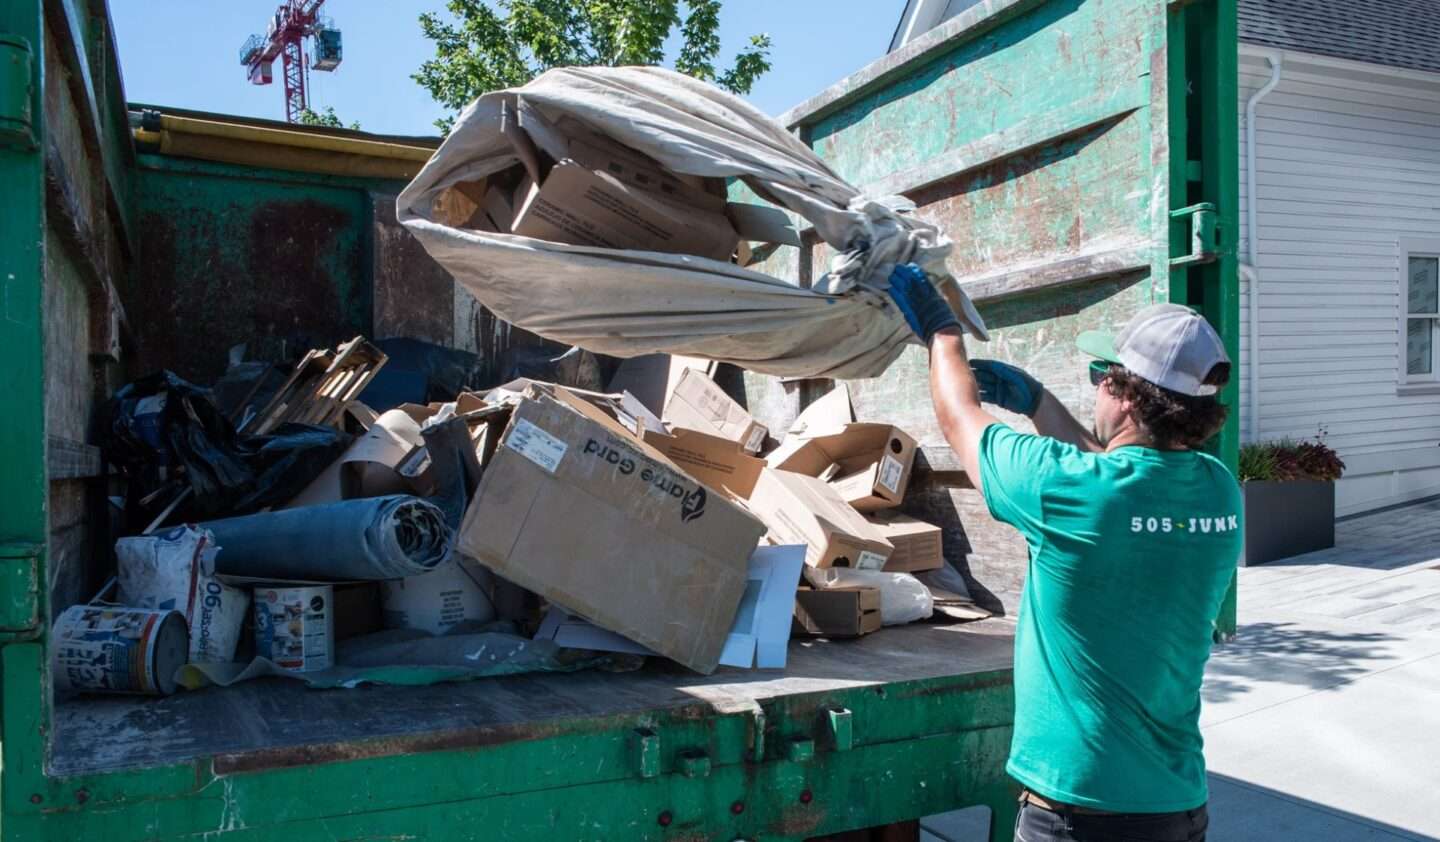 505-Junk team member loading the truck during a renovation removal in Vancouver